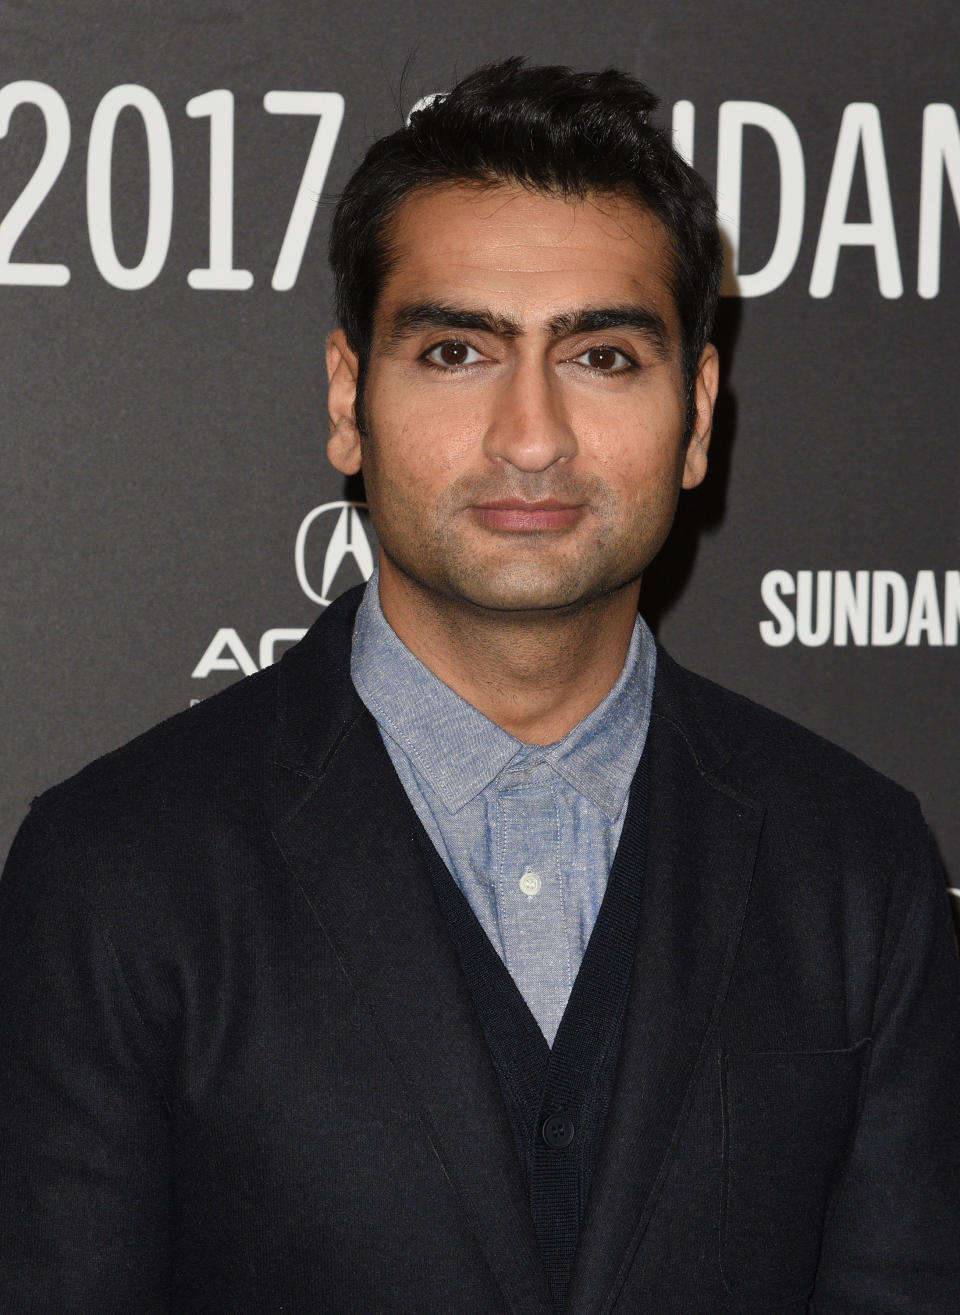 "Silicon Valley's" Kumail Nanjiani tweeted:&nbsp;"As someone who was born in Pakistan I can tell you coming into America is VERY difficult. A #Muslimban accomplishes nothing but hate."